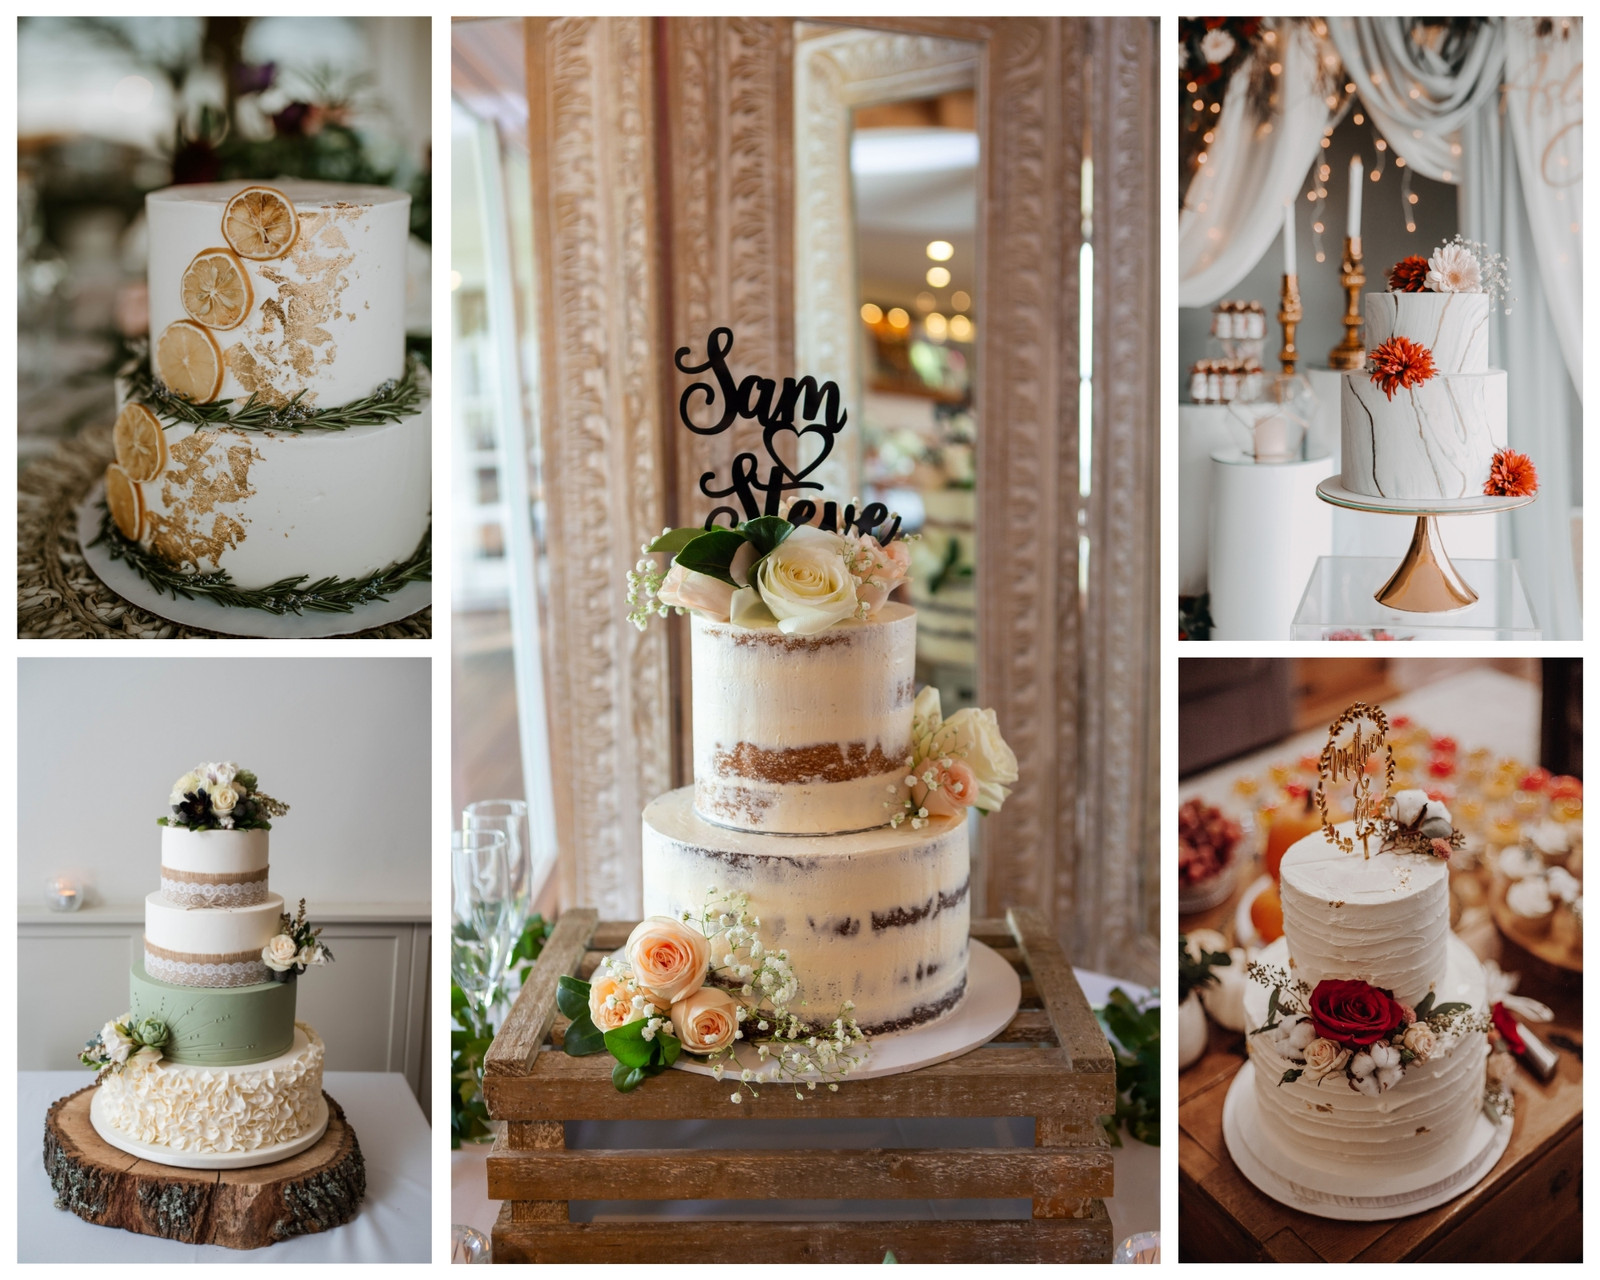 What is the best wedding cake size for 200 guests?